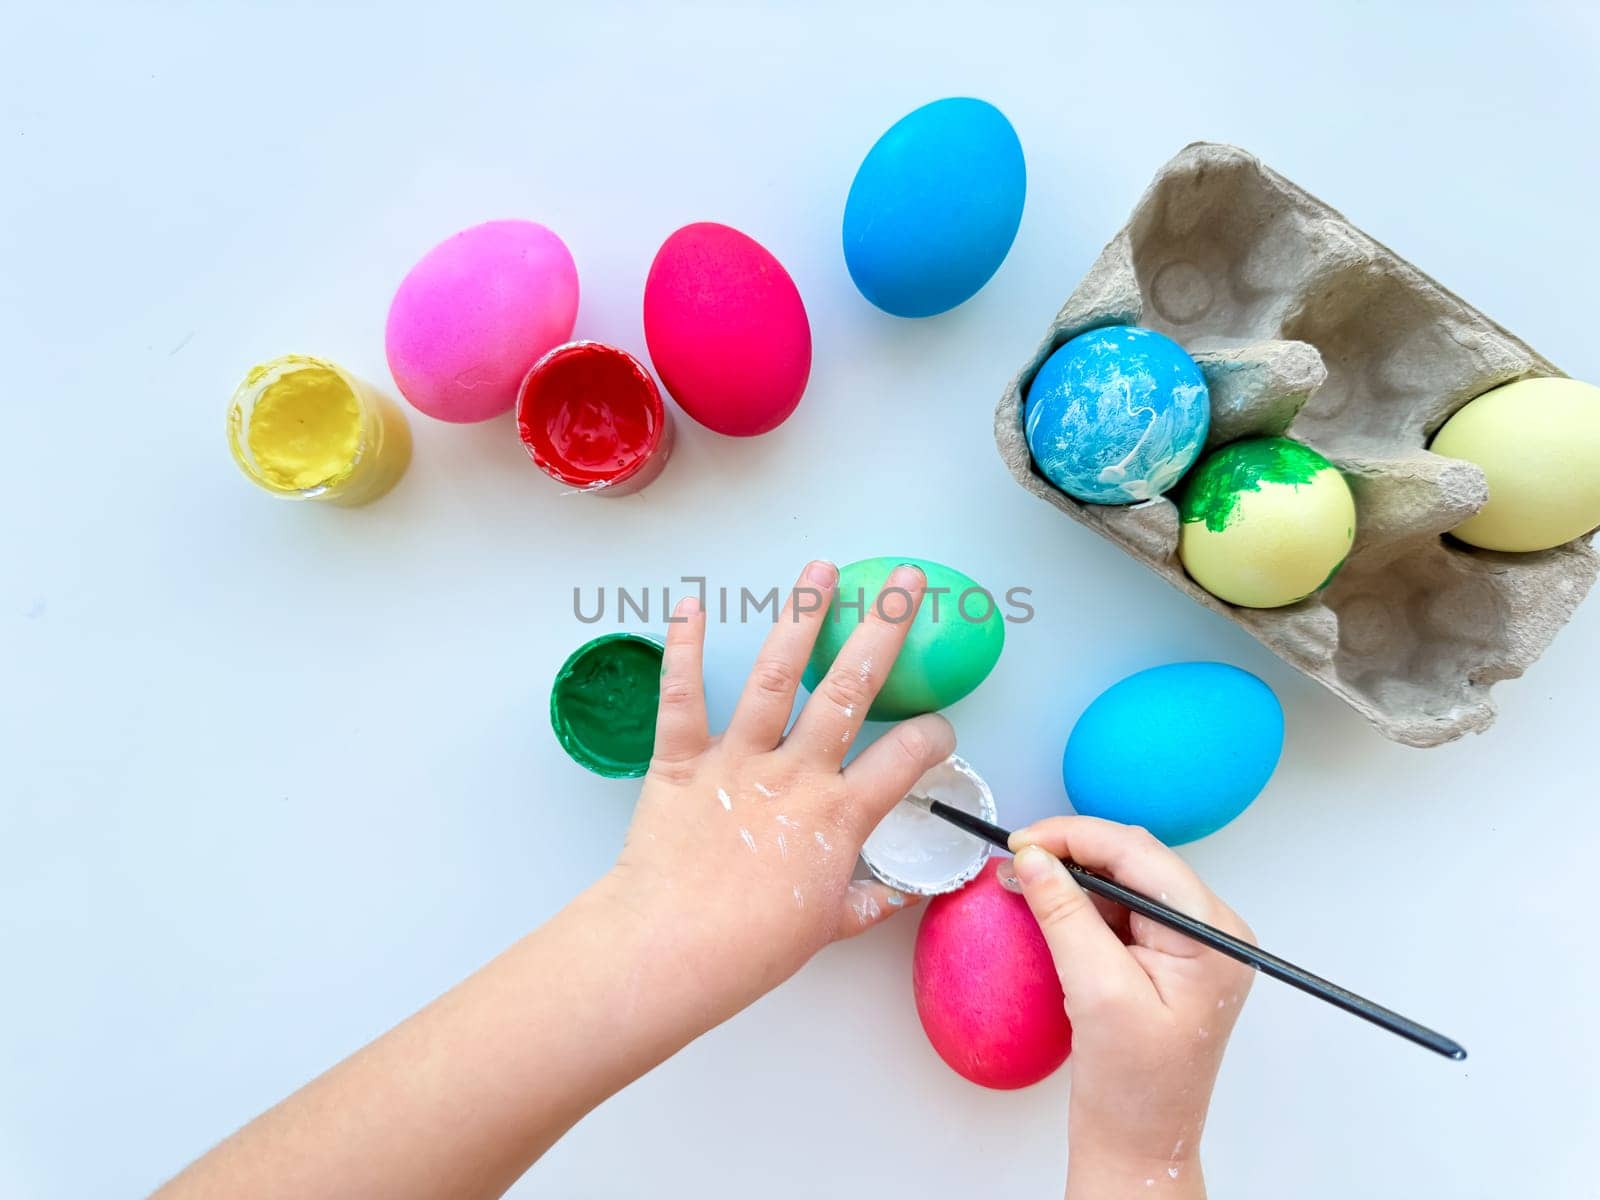 Childrens hands paint Easter eggs with brush surrounded by colorful eggs and jars of paints on white table, creative holiday activity. by Lunnica